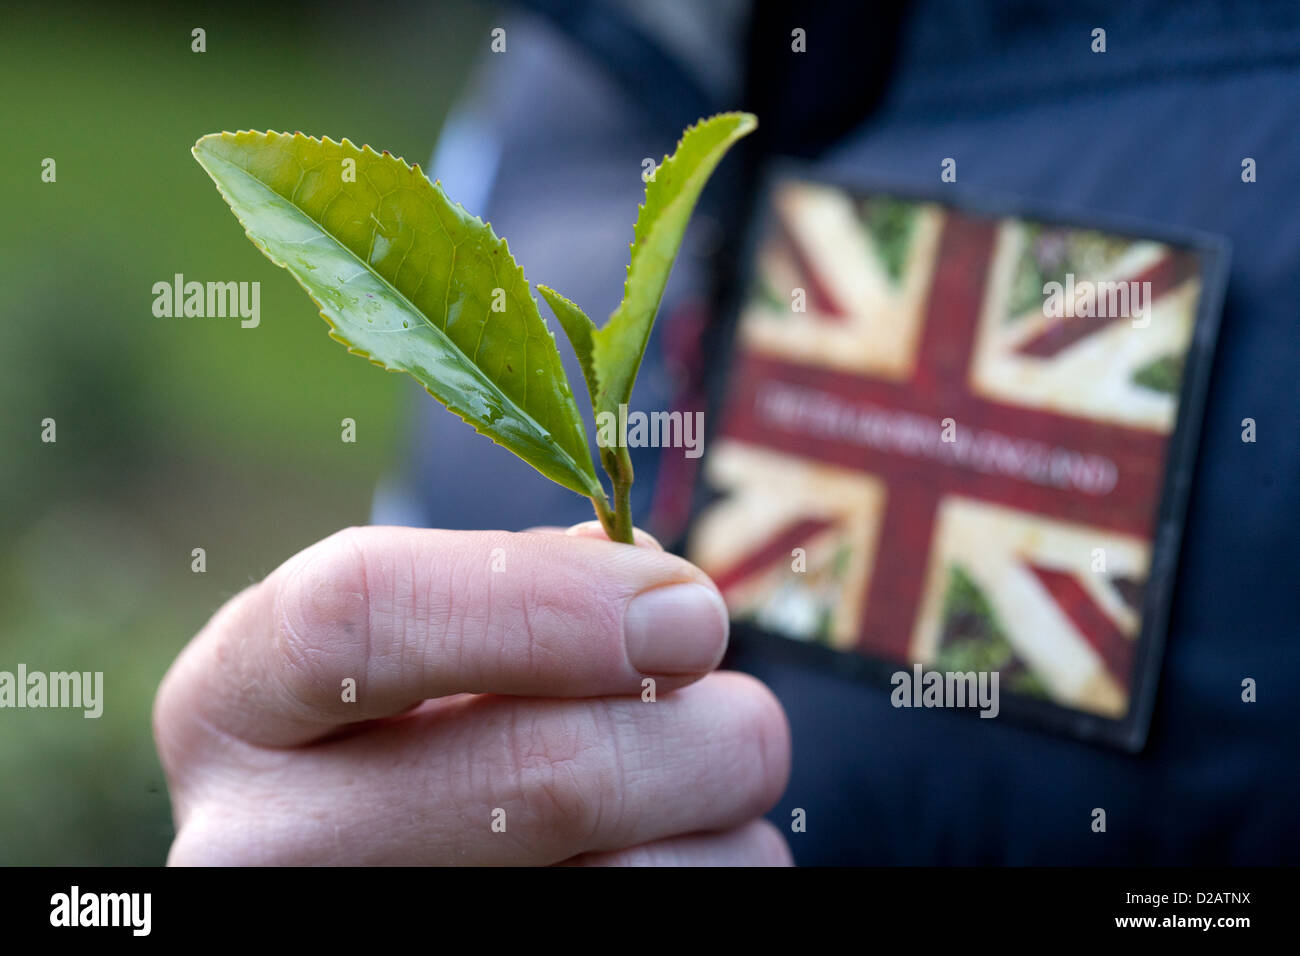 Jonathan Jones of Tregothnan Estate near Truro, Cornwall with leaves picked from his Tea plants in The Himalayan Valley Stock Photo